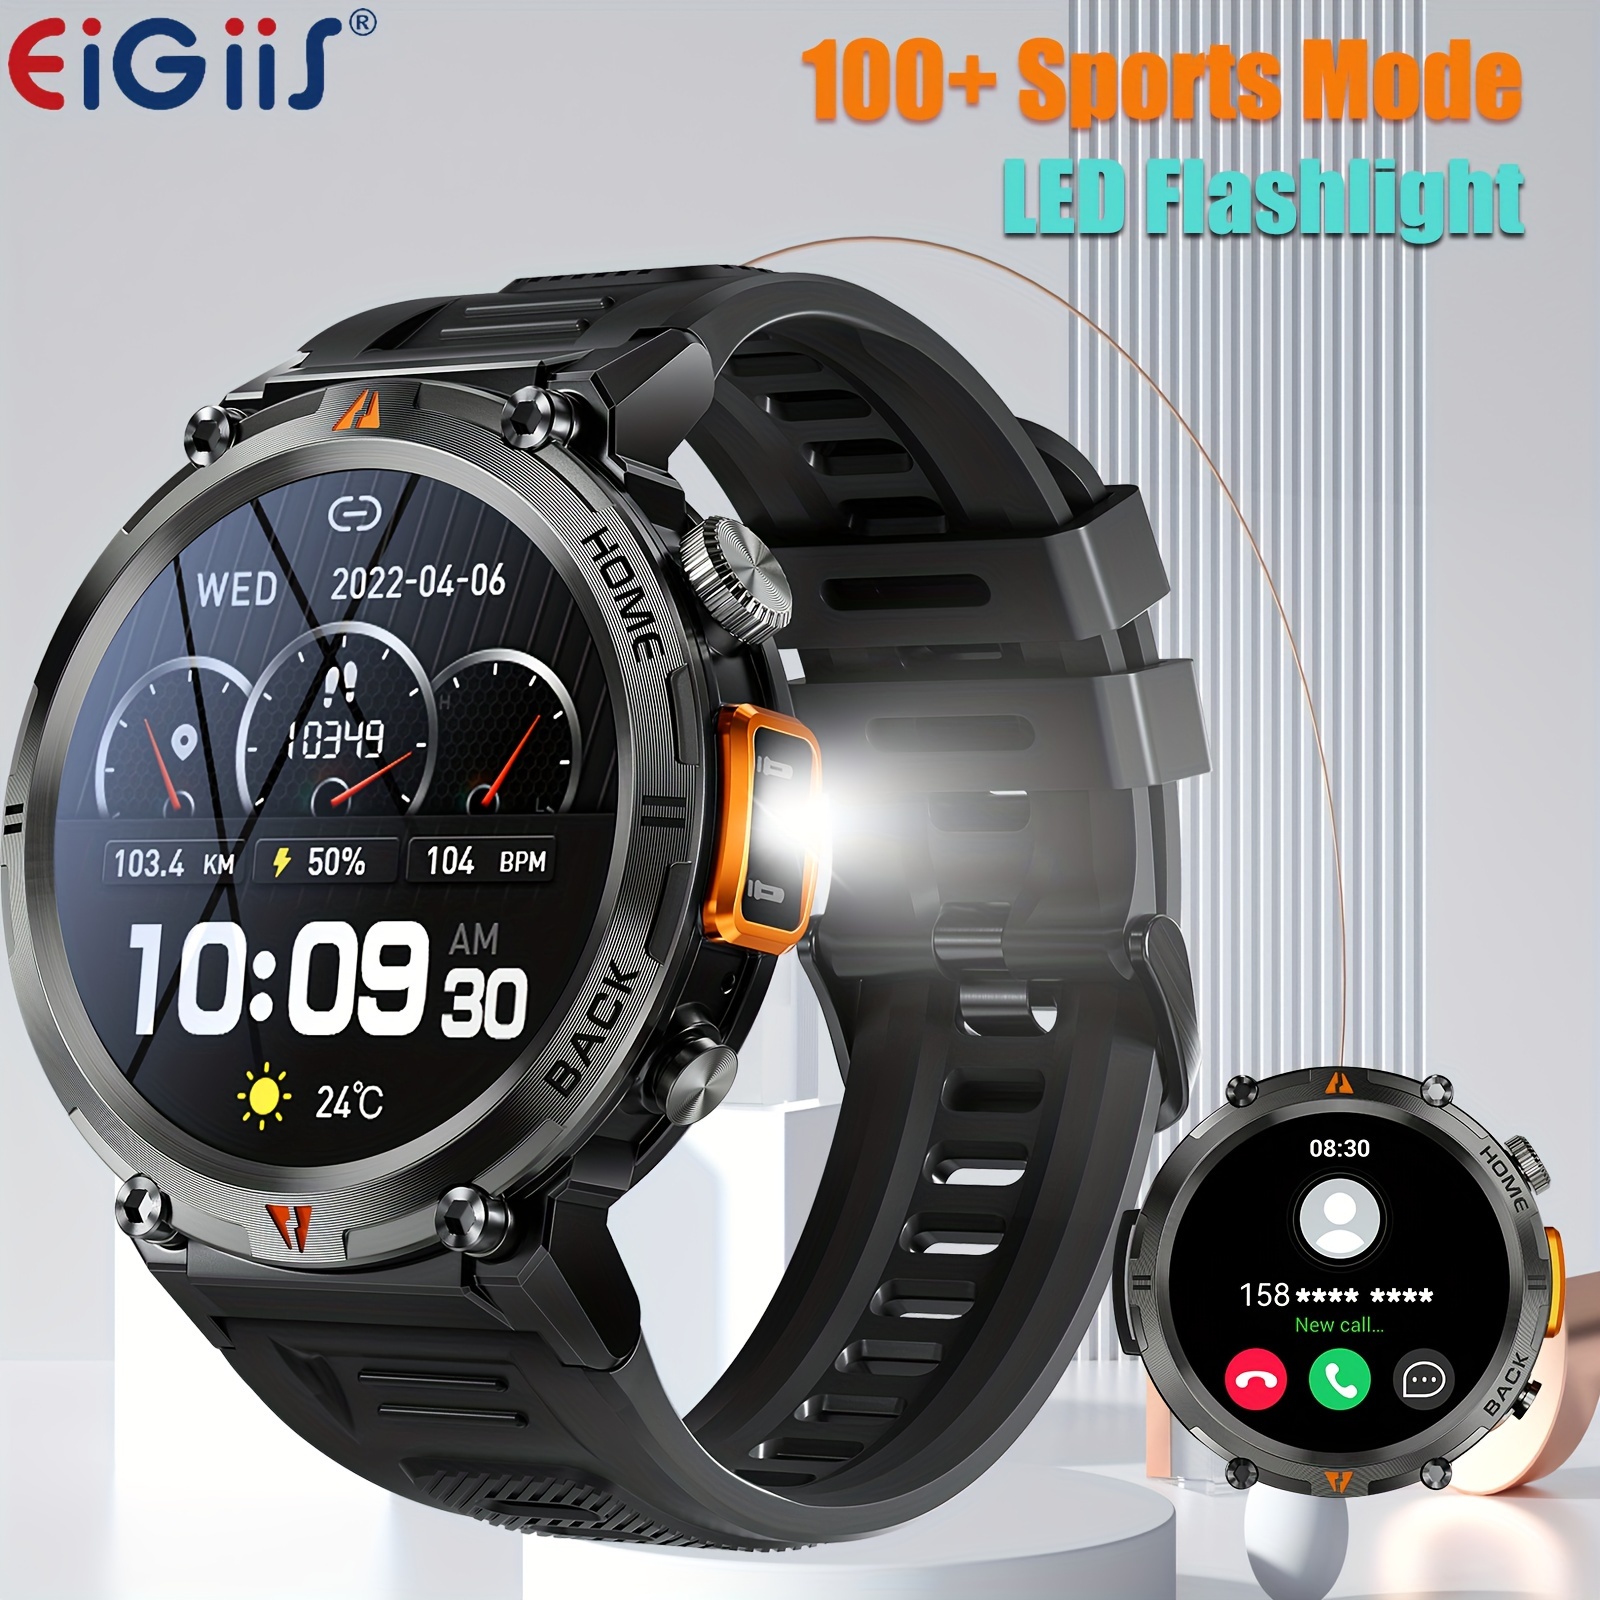 

Eigiis Smart Watch For Men With Led Lighting, Wireless Calling (answer/make Calls), Outdoor Sports Watch With Weather, Remote Photo, Music Control, Smartwatch For Iphone&android Phone